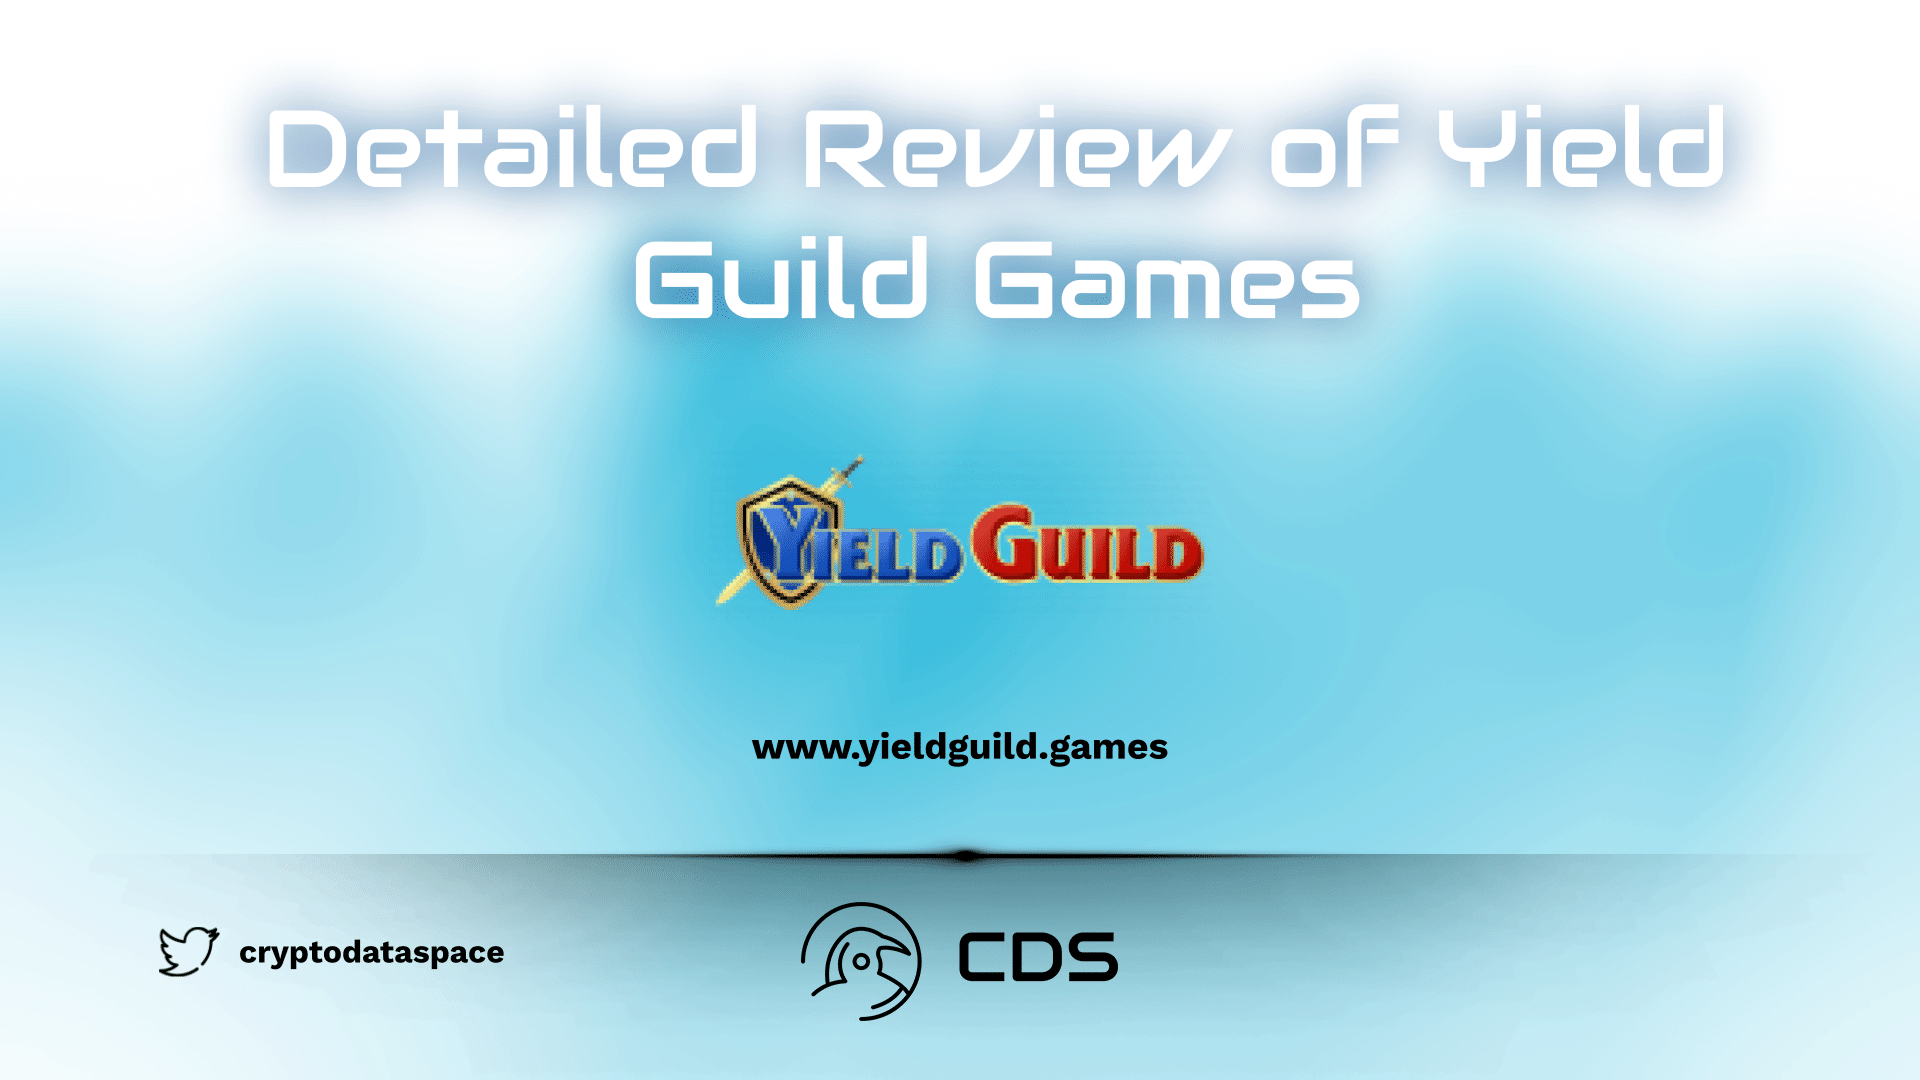 Detailed Review of Yield Guild Games